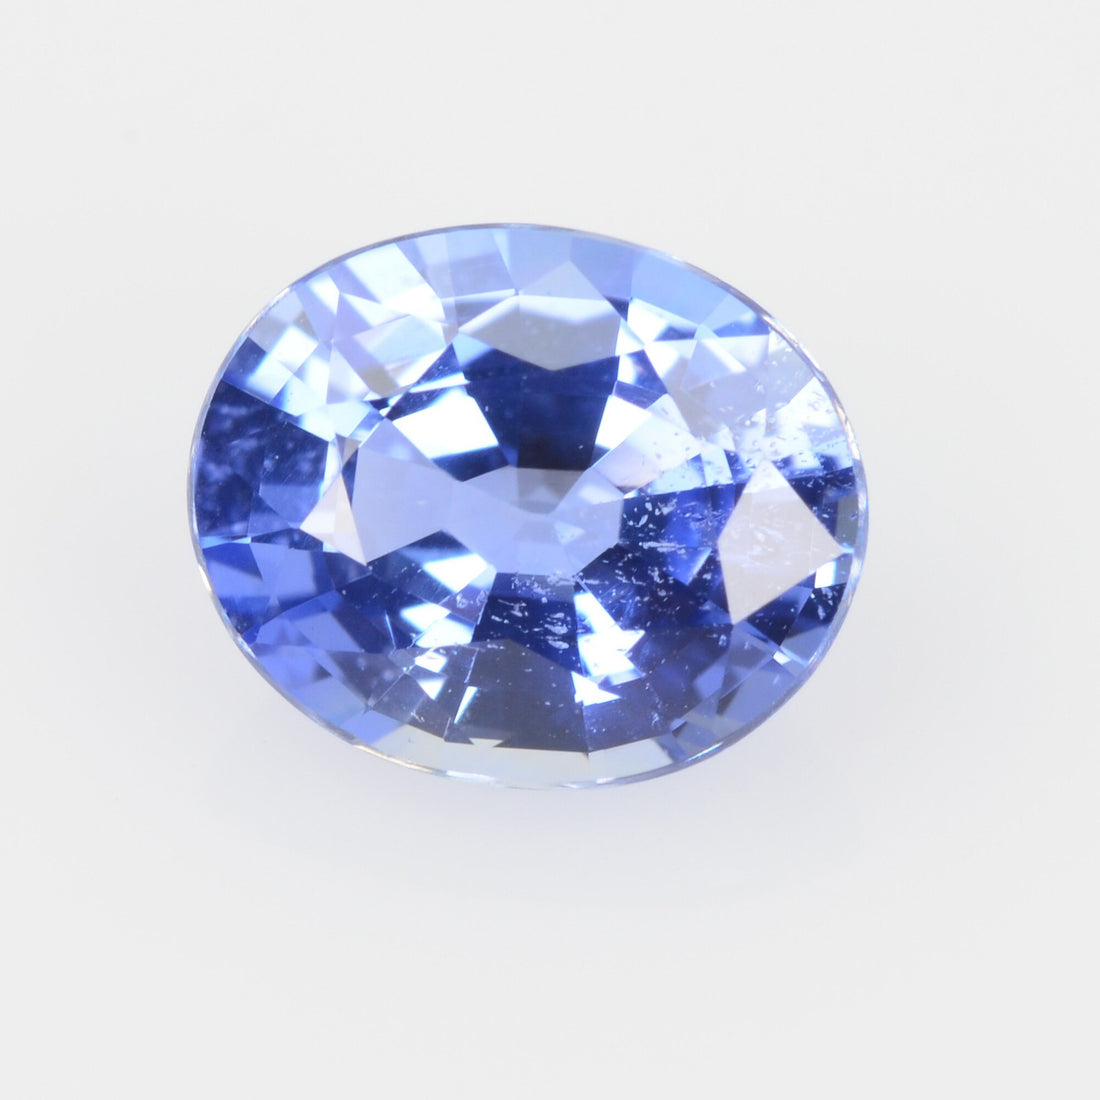 1.50 cts Unheated Natural Blue Sapphire Loose Gemstone Oval Cut